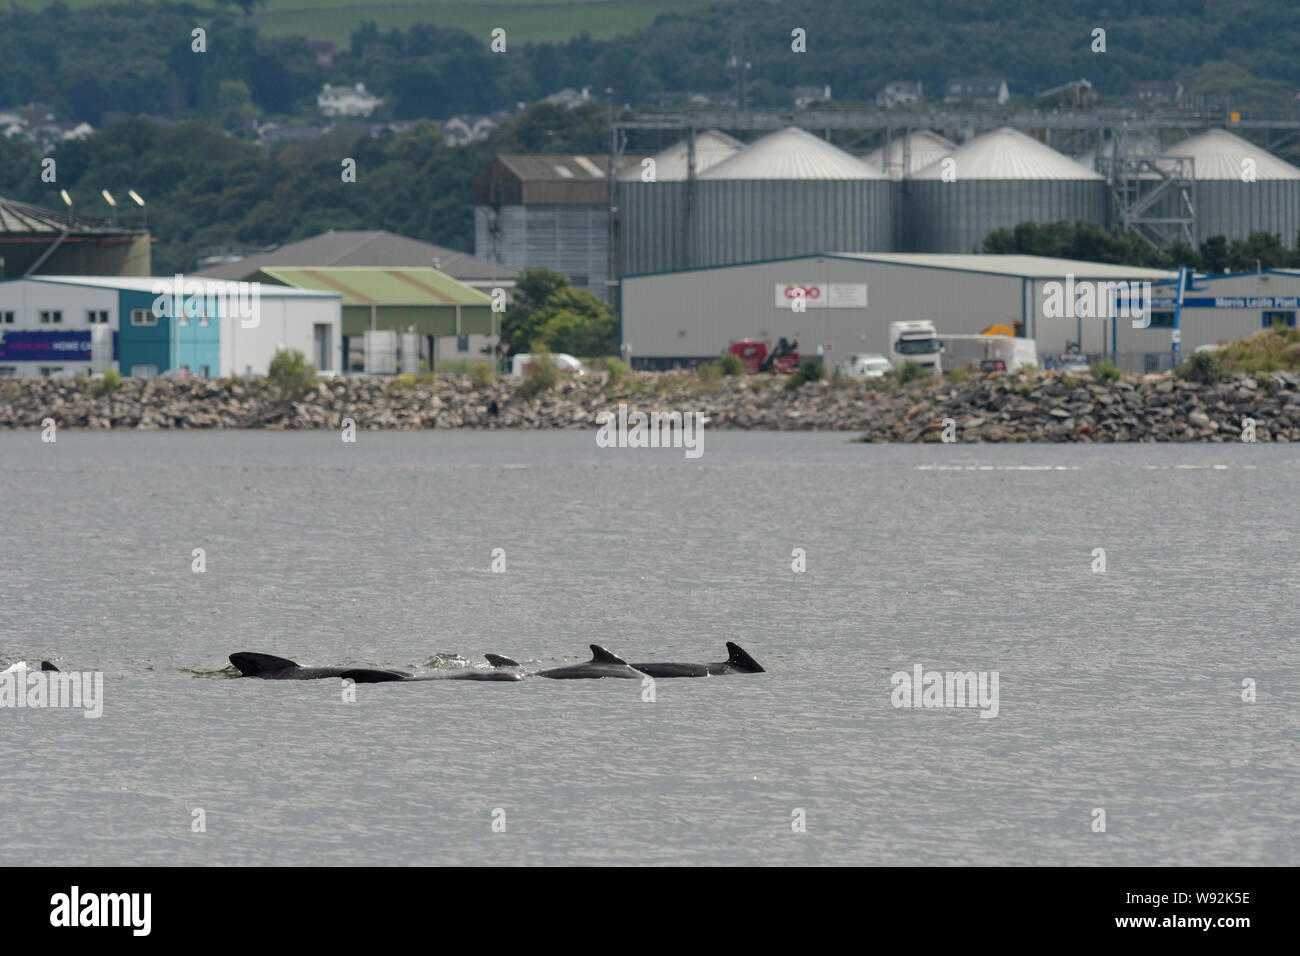 Long-finned pilot whale (Globicephala melas) passing through the inner Moray Firth, Inverness, Highlands, Scotland. Stock Photo